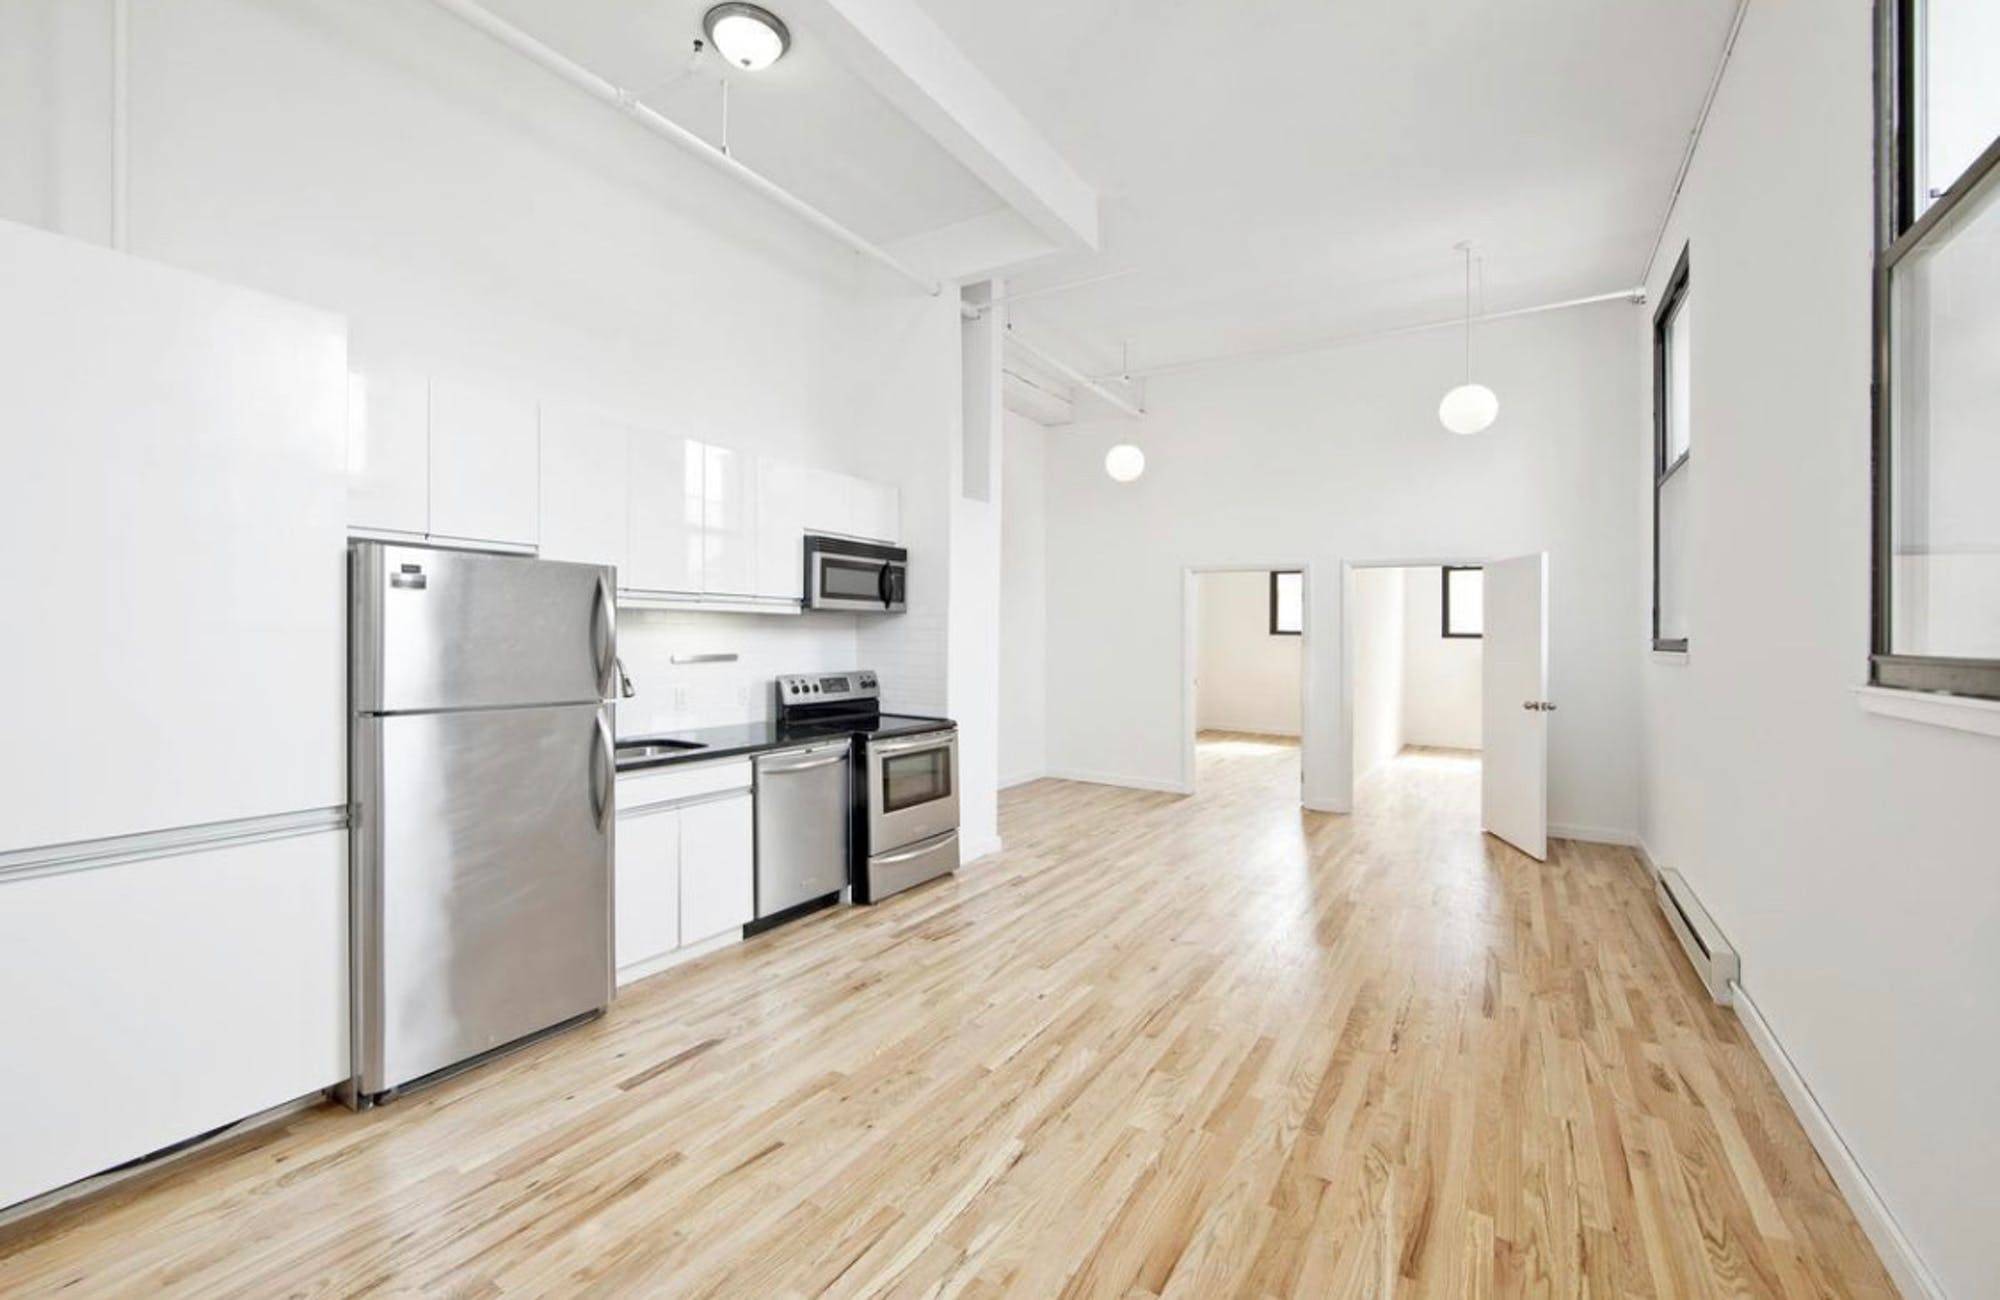 True 3 Bedroom 1 Bathroom apartments with 14 ceilings, large windows that provide natural light in this airy unit.